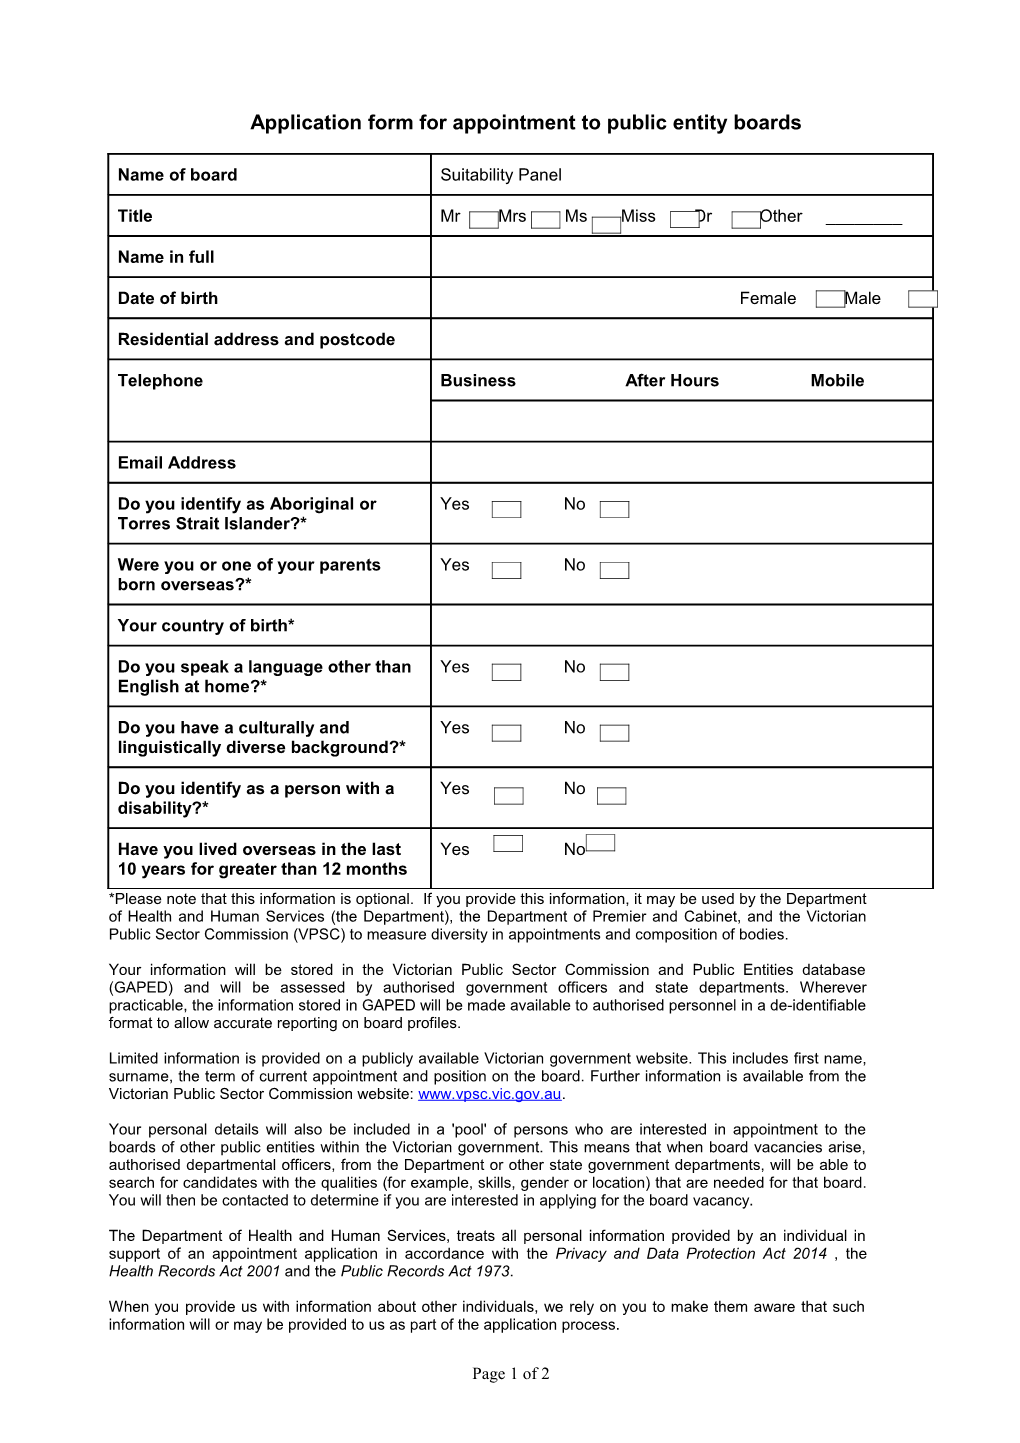 Application Form for Appointment to Public Entity Boards - Suitability Panel Victoria